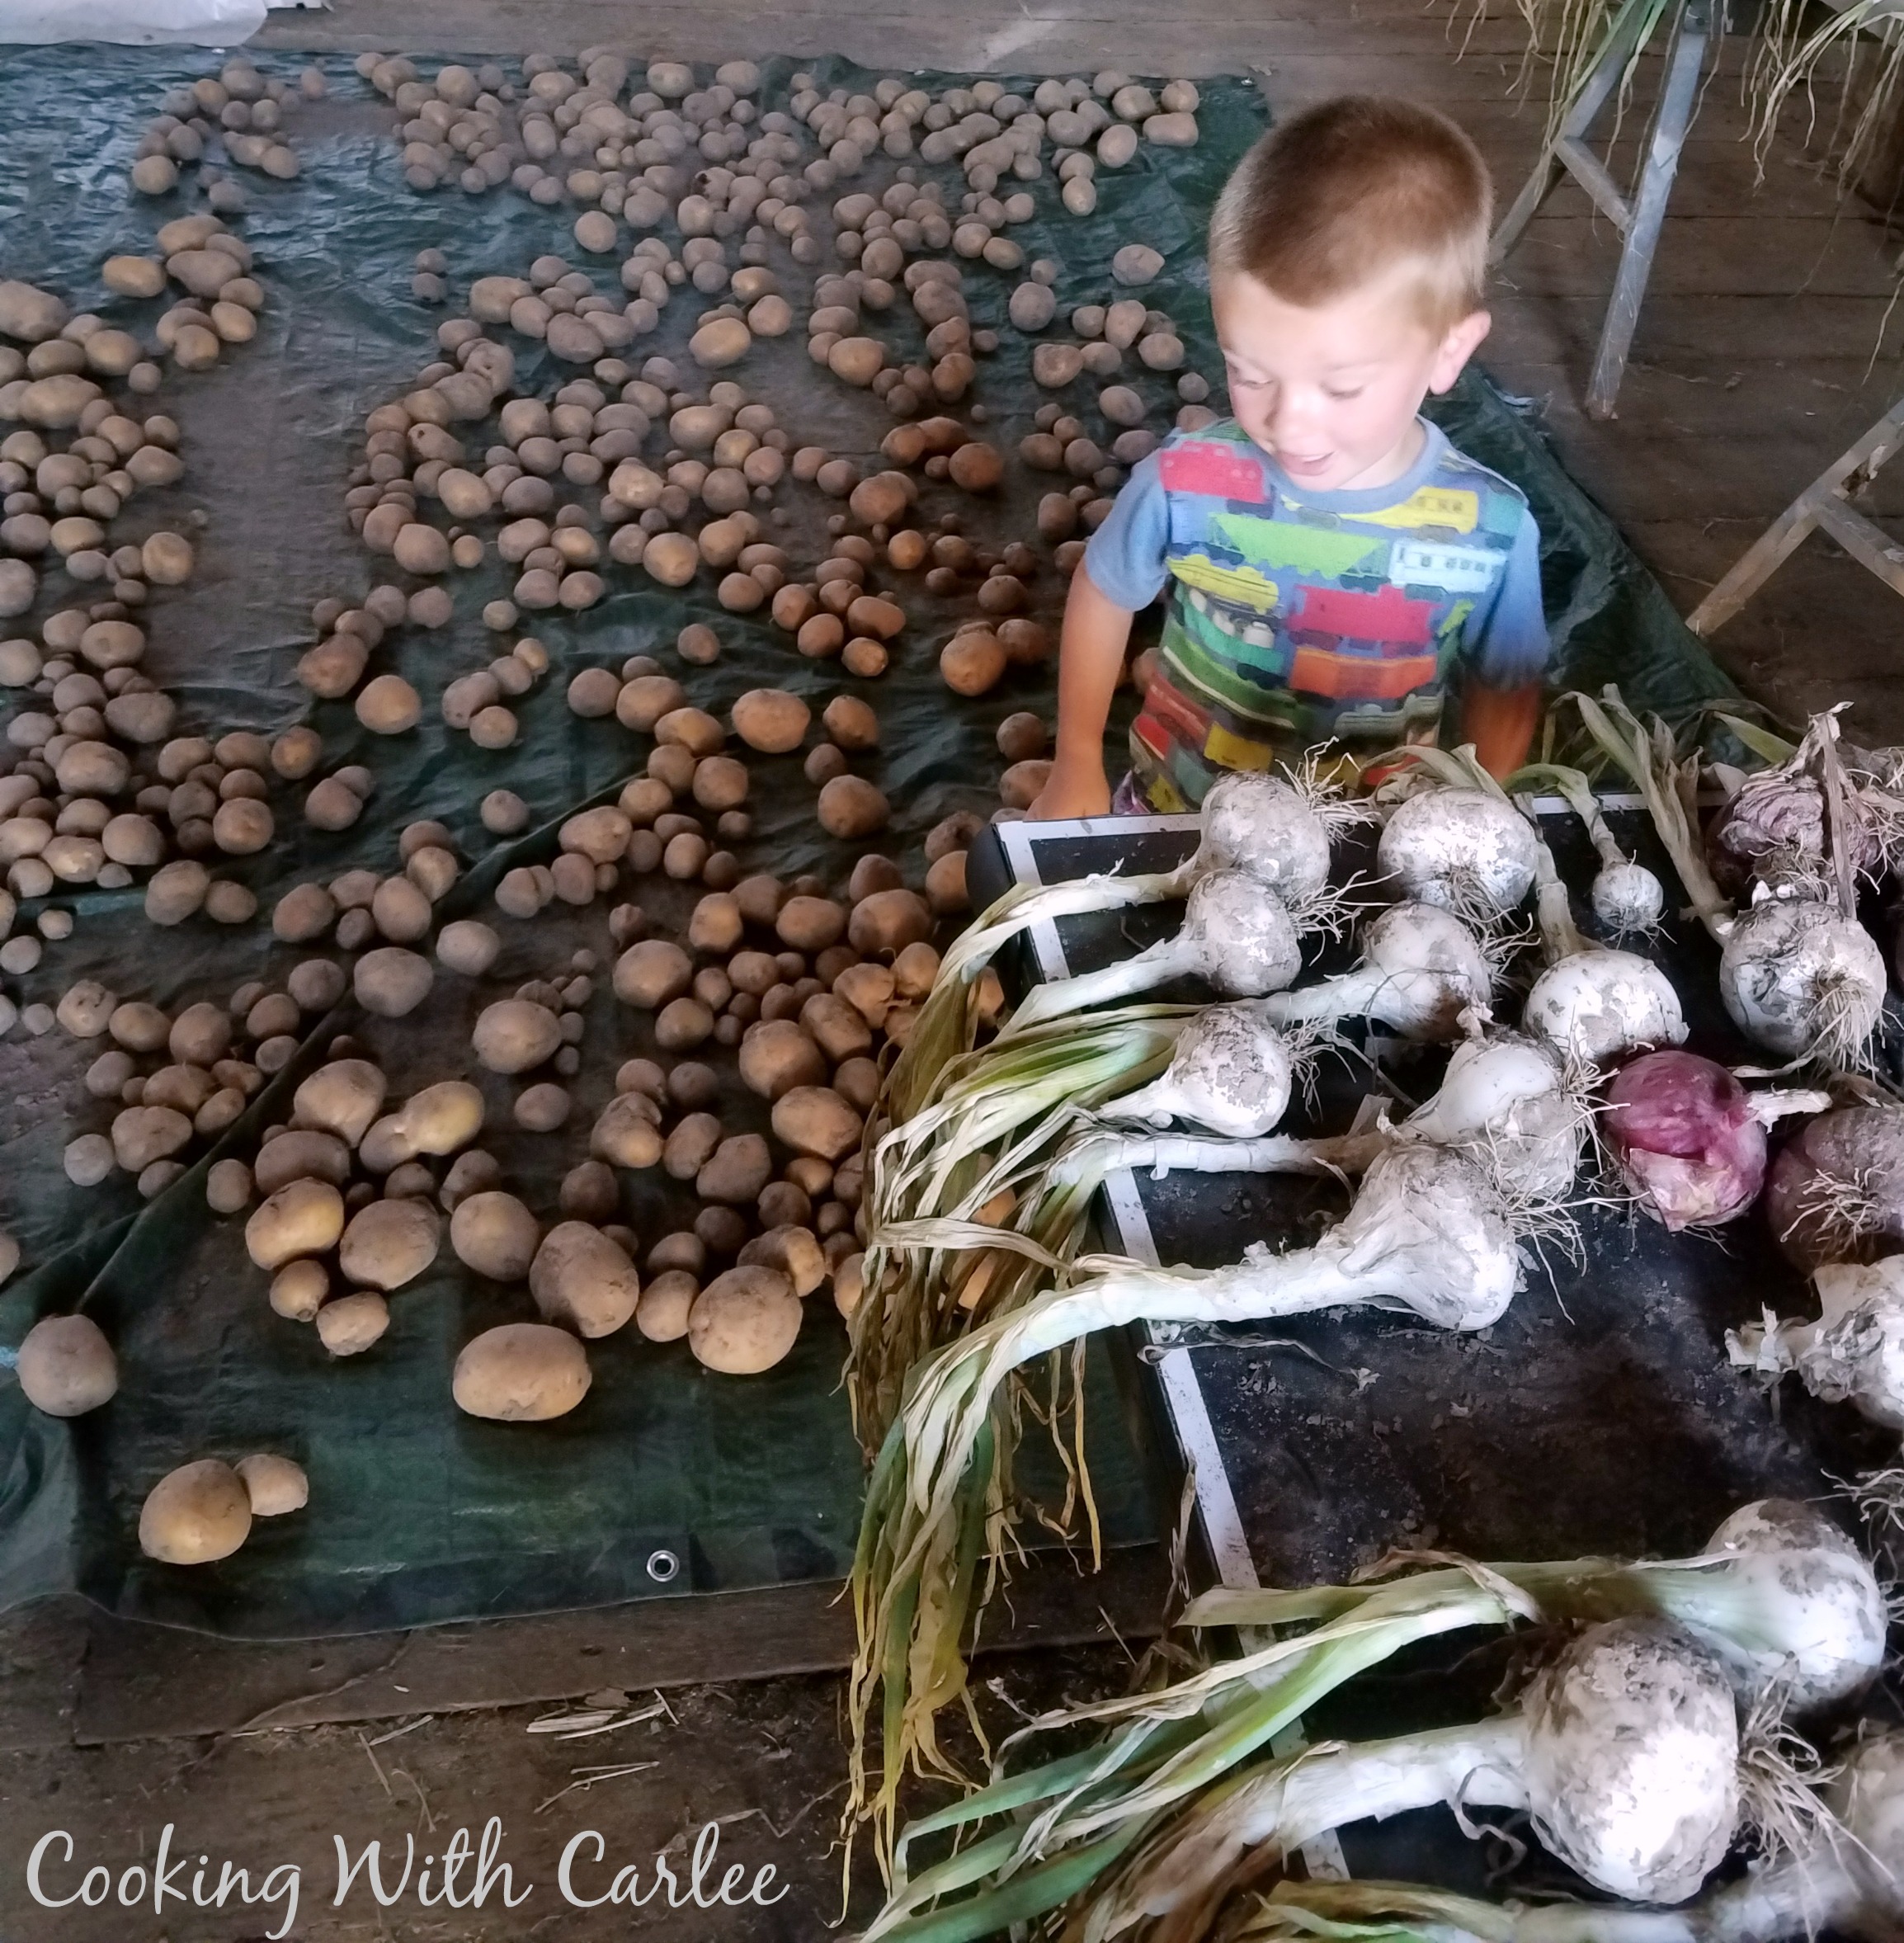 little dude between tons of freshly harvested onions and potatoes.